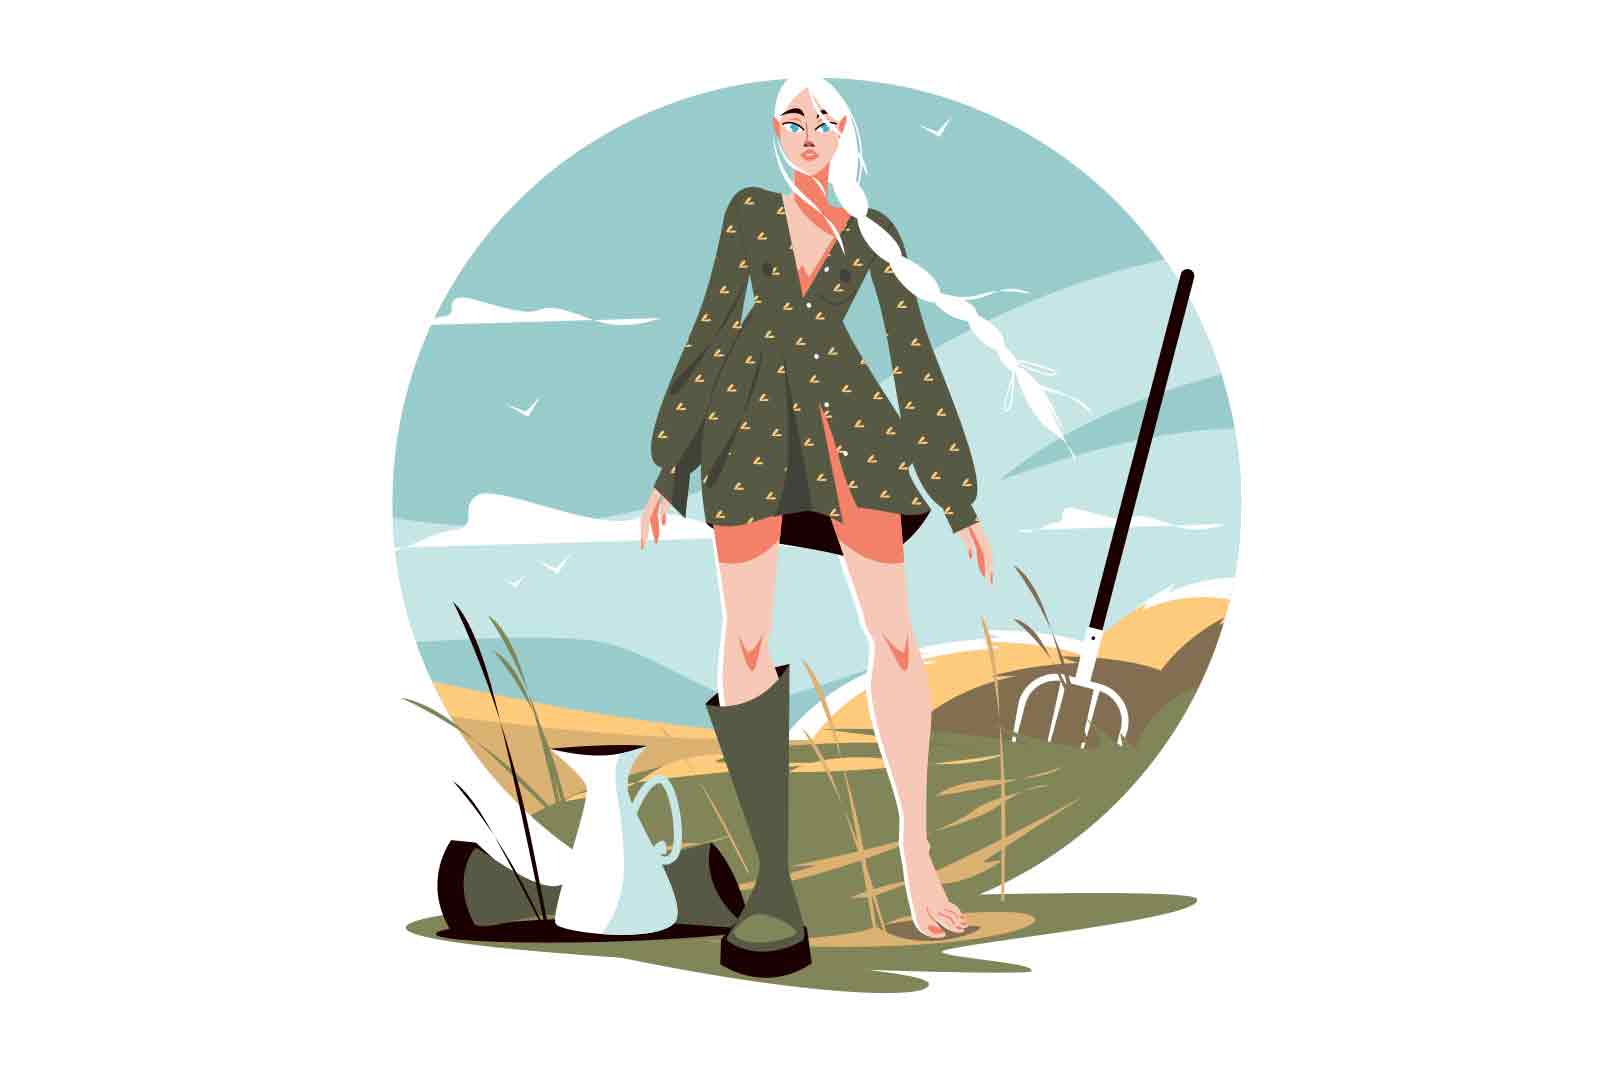 Rural girl working in field, countryside lifestyle vertor illustration. Harvesting or ingathering flat concept. Agriculture farming and nature